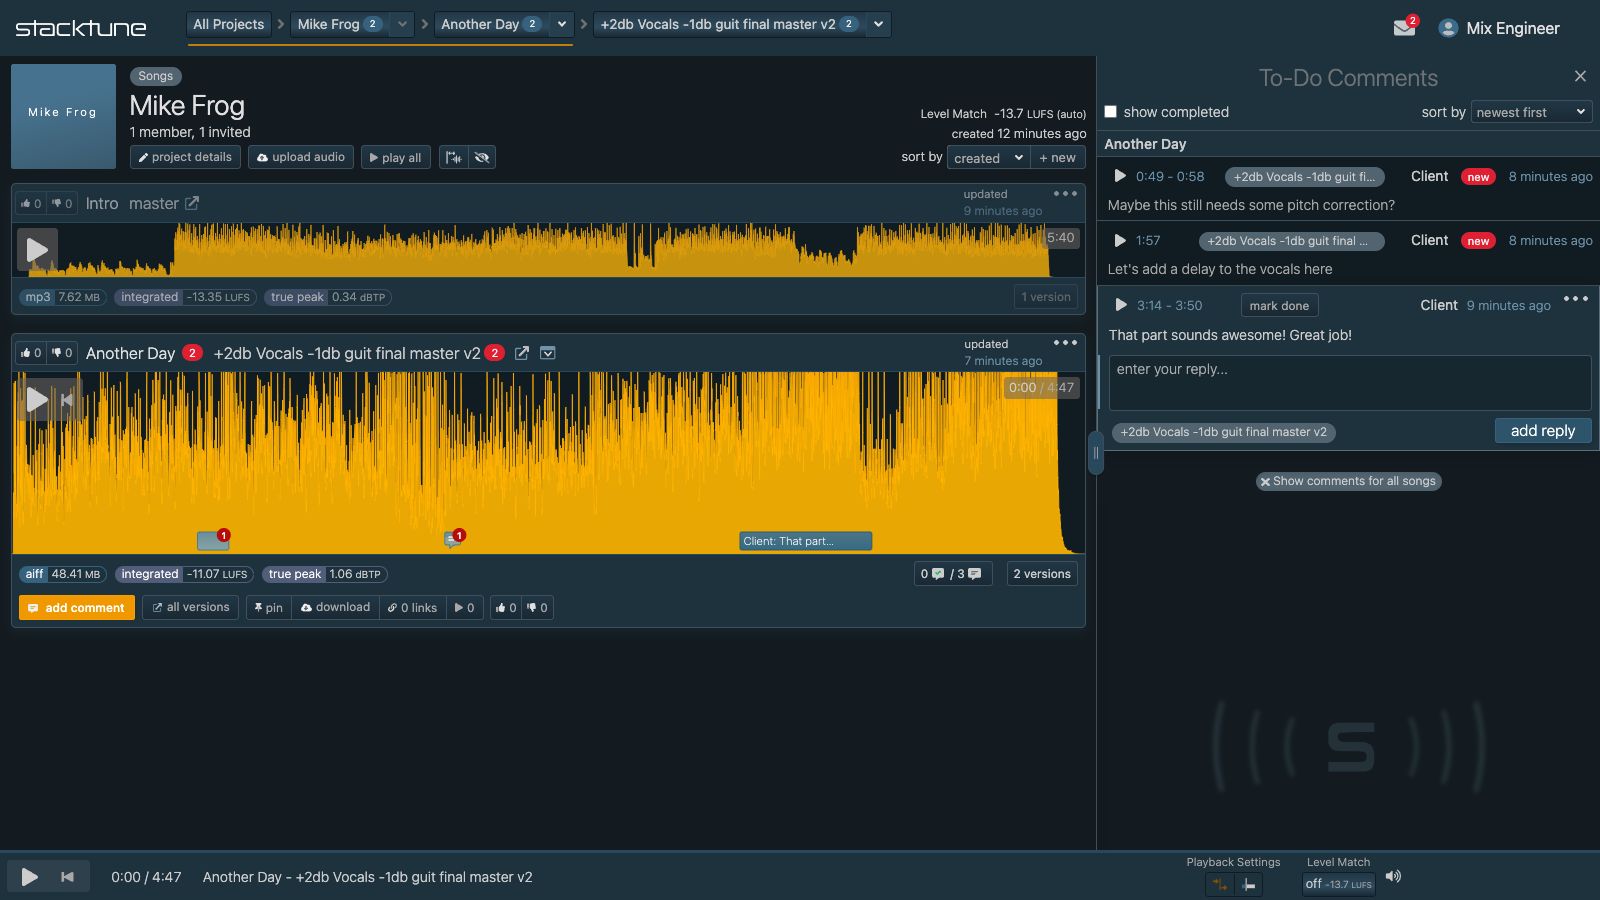 screenshot with audio file and comments